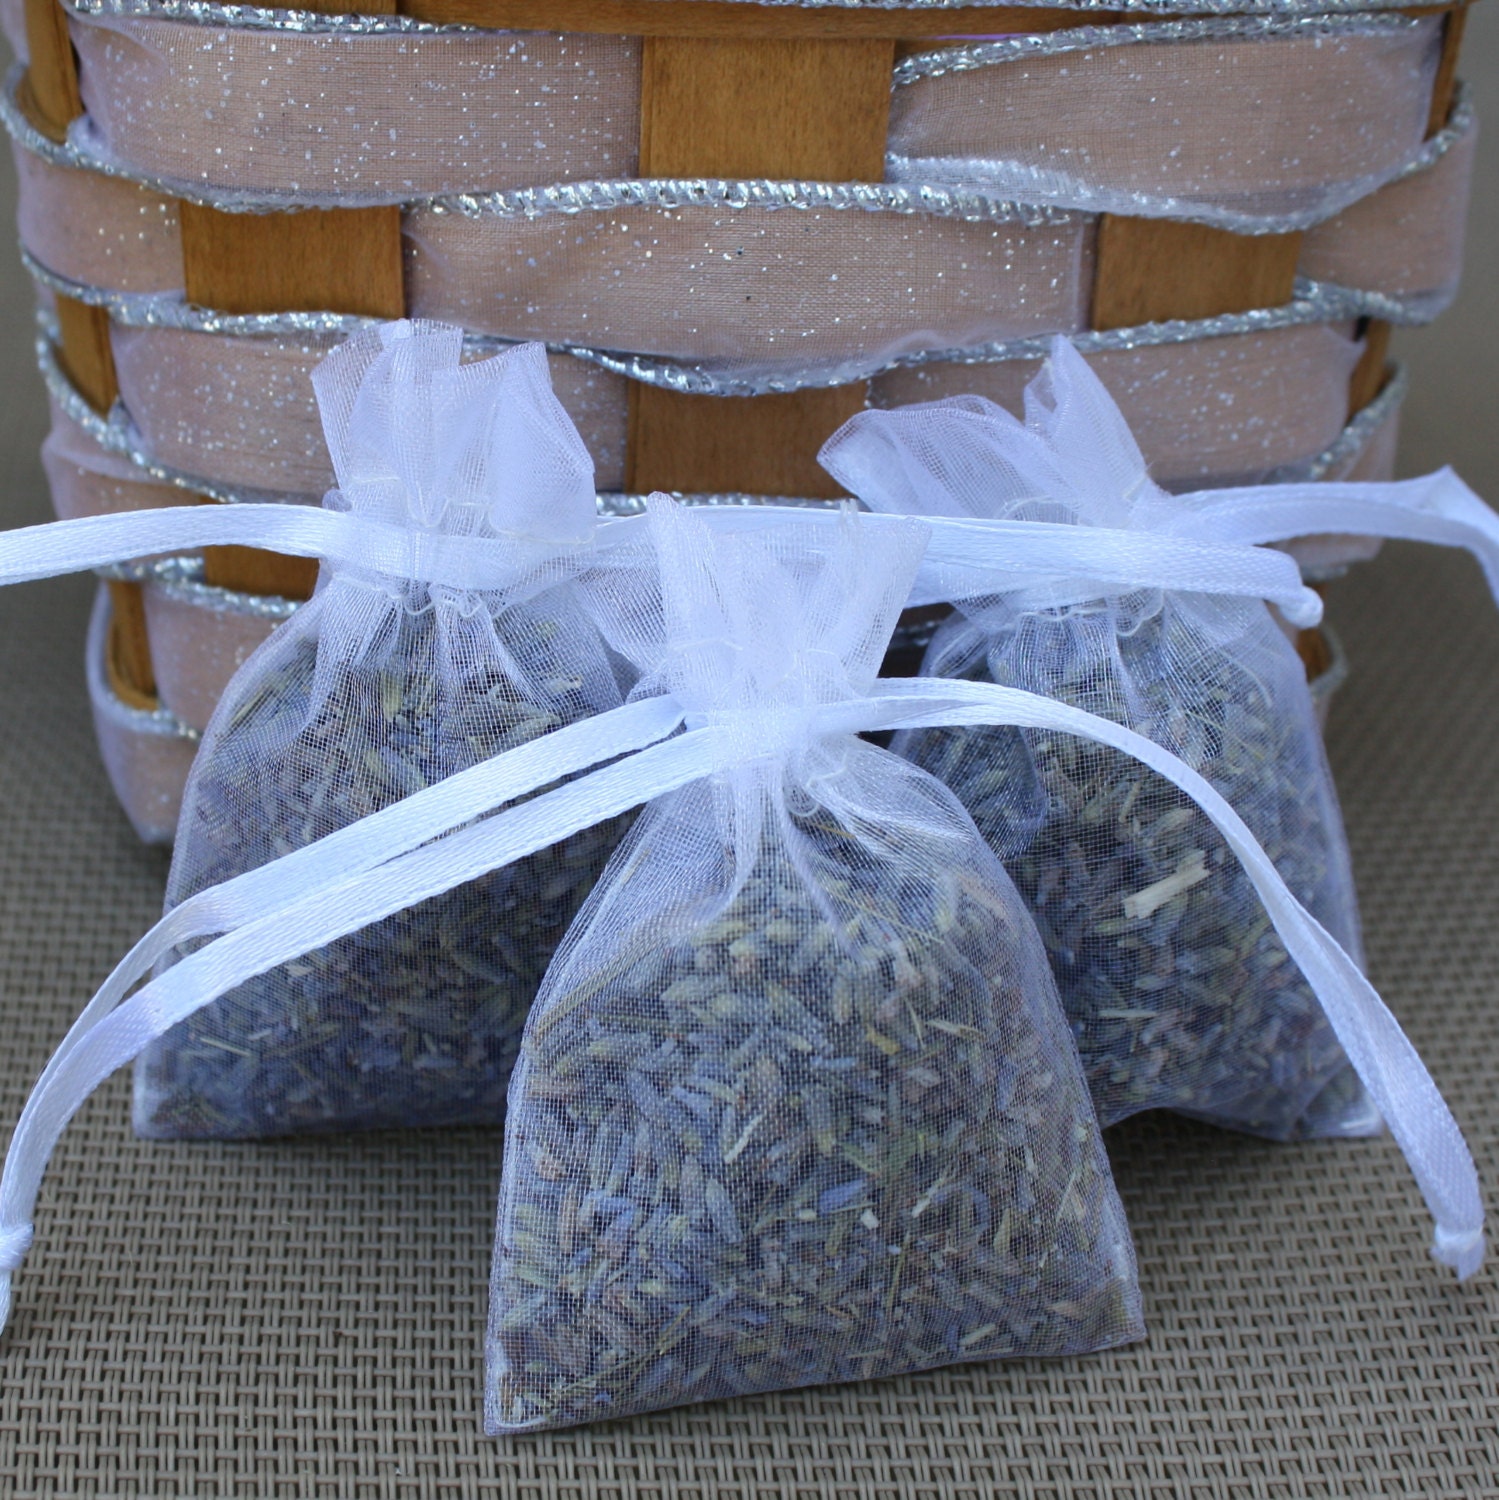 Download 25 Lavender Sachet Bags in White for Wedding Toss or Wedding